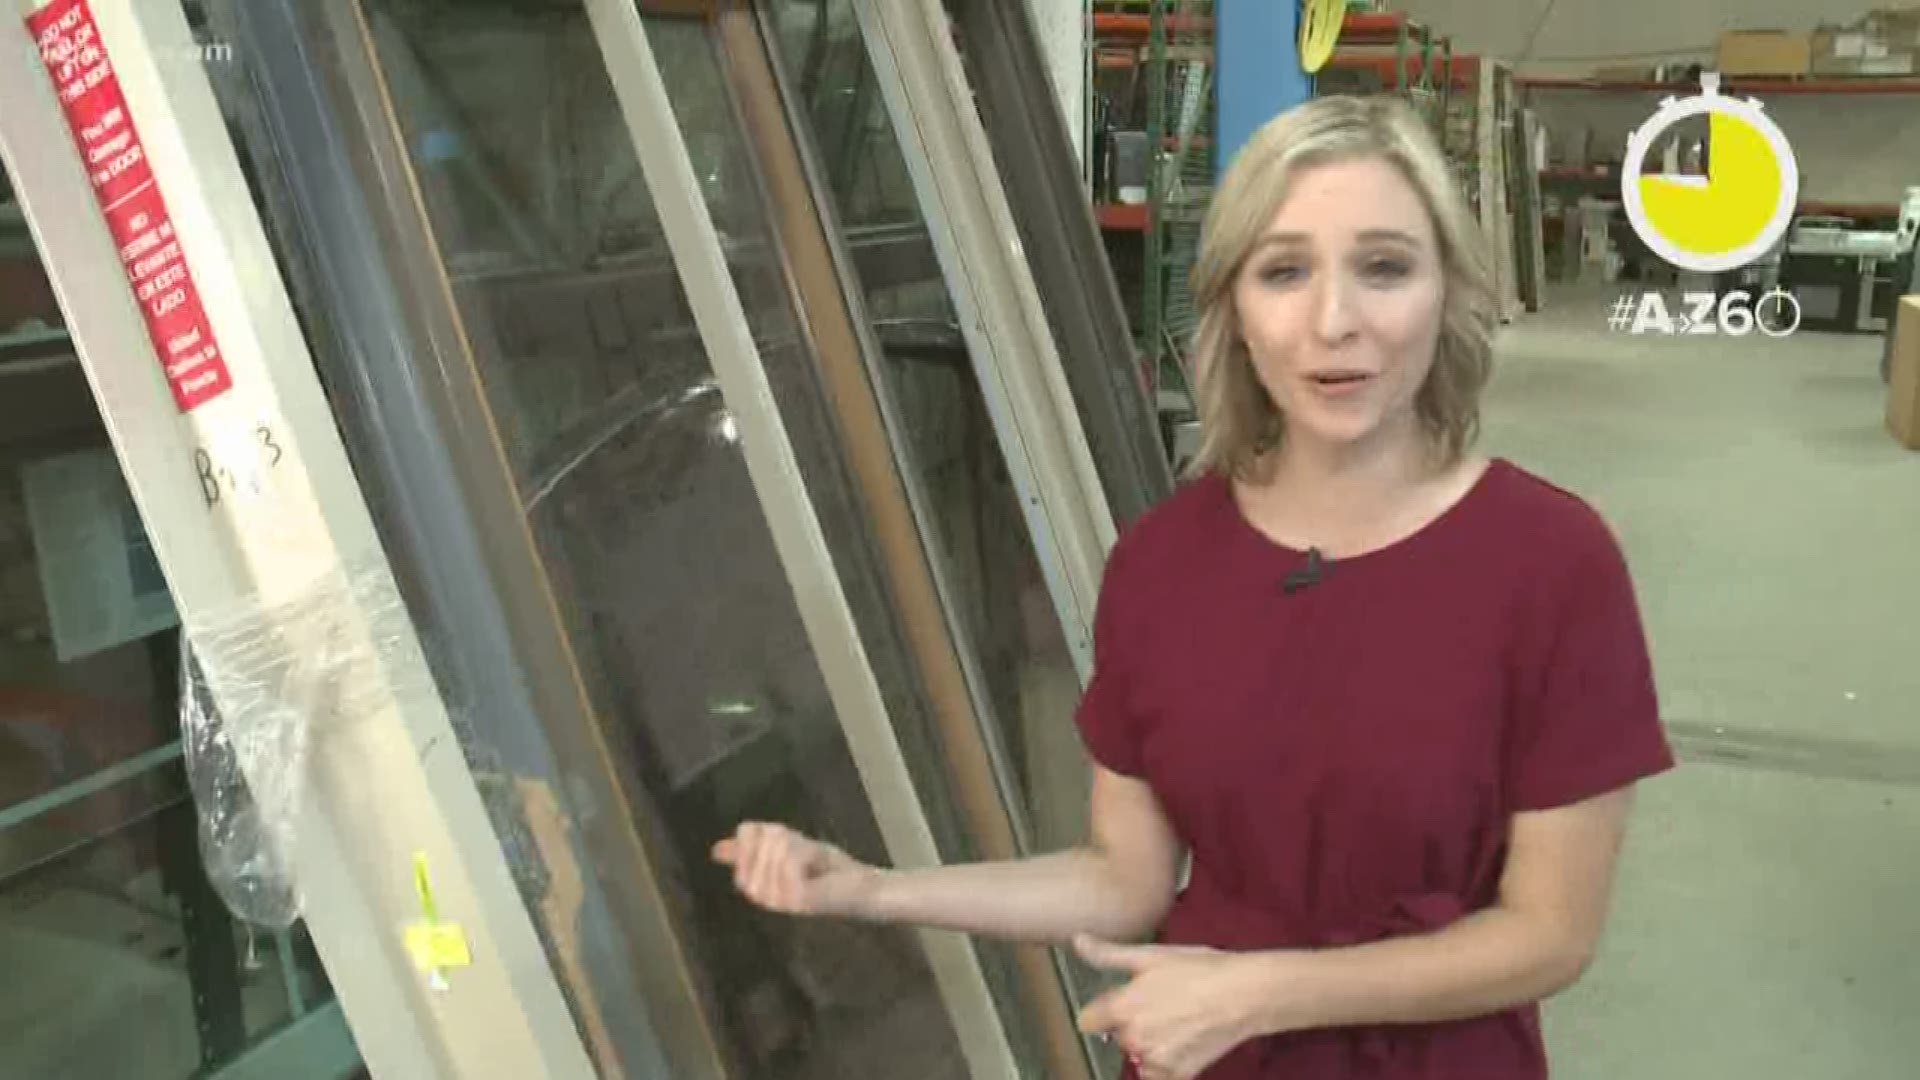 One Valley company is helping homeowners get the most out of their old kitchen materials and equipment. Colleen Sikora has the details.